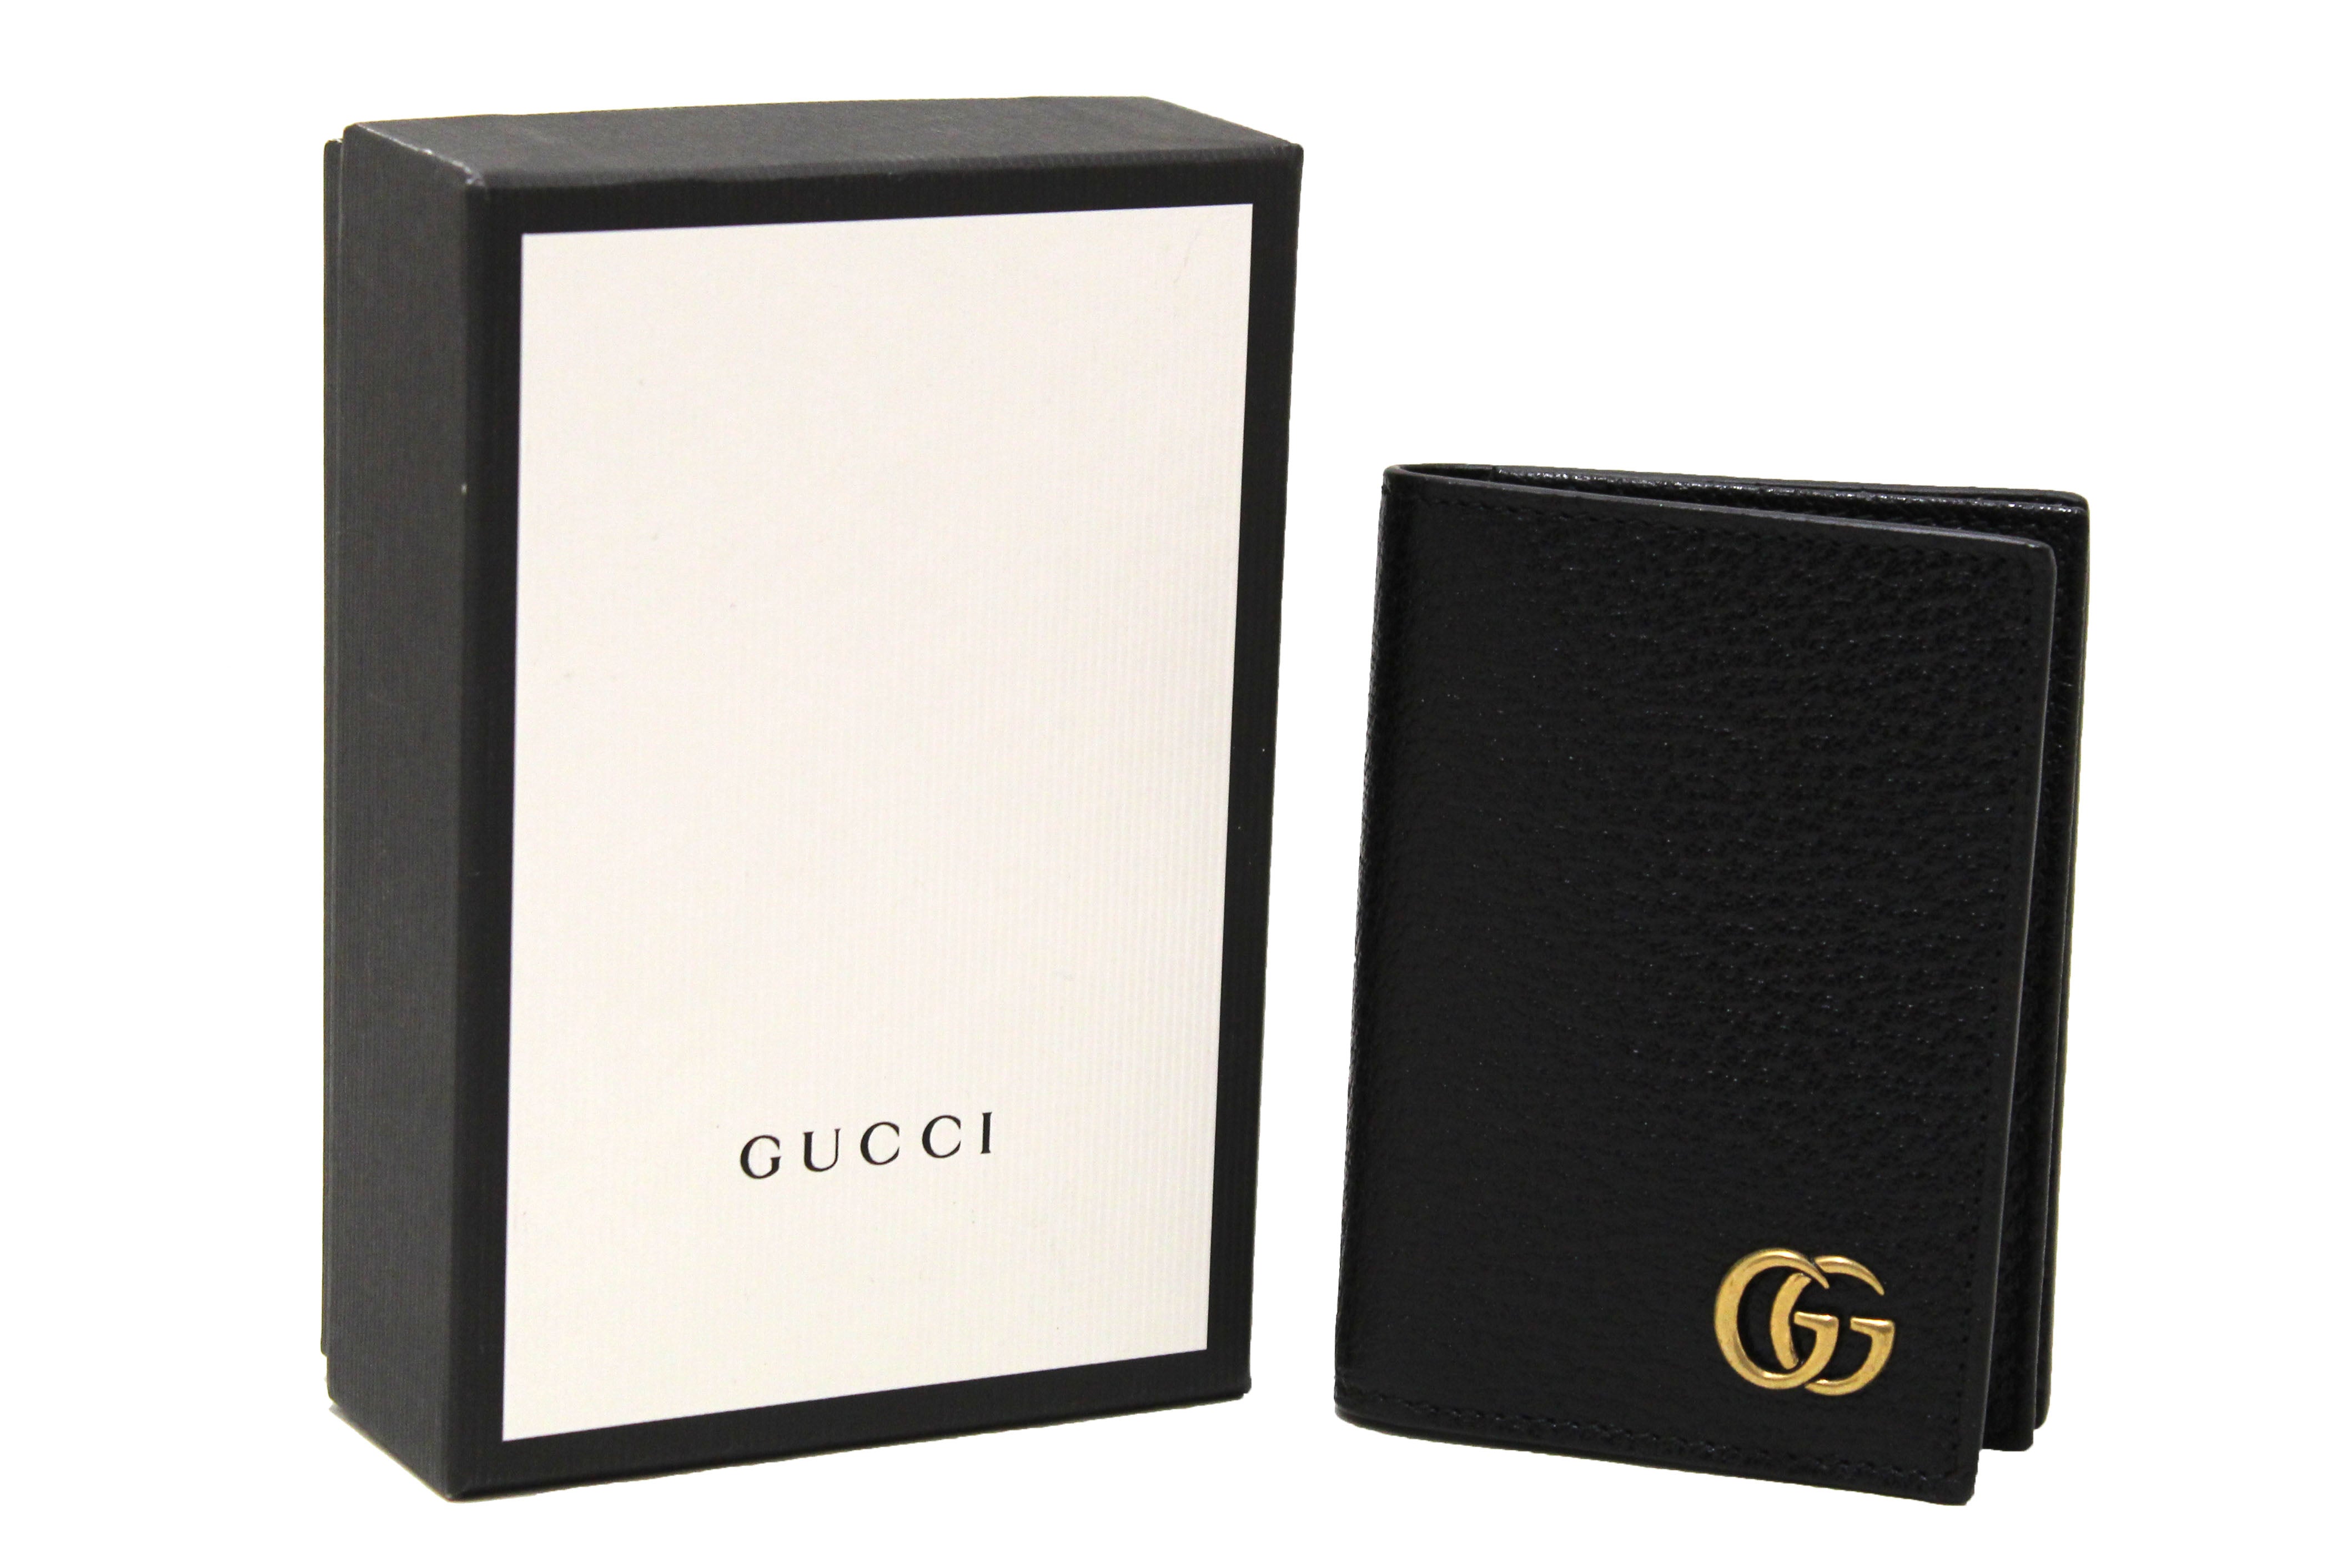 NEW Authentic Gucci GG Marmont Black Leather Card Case